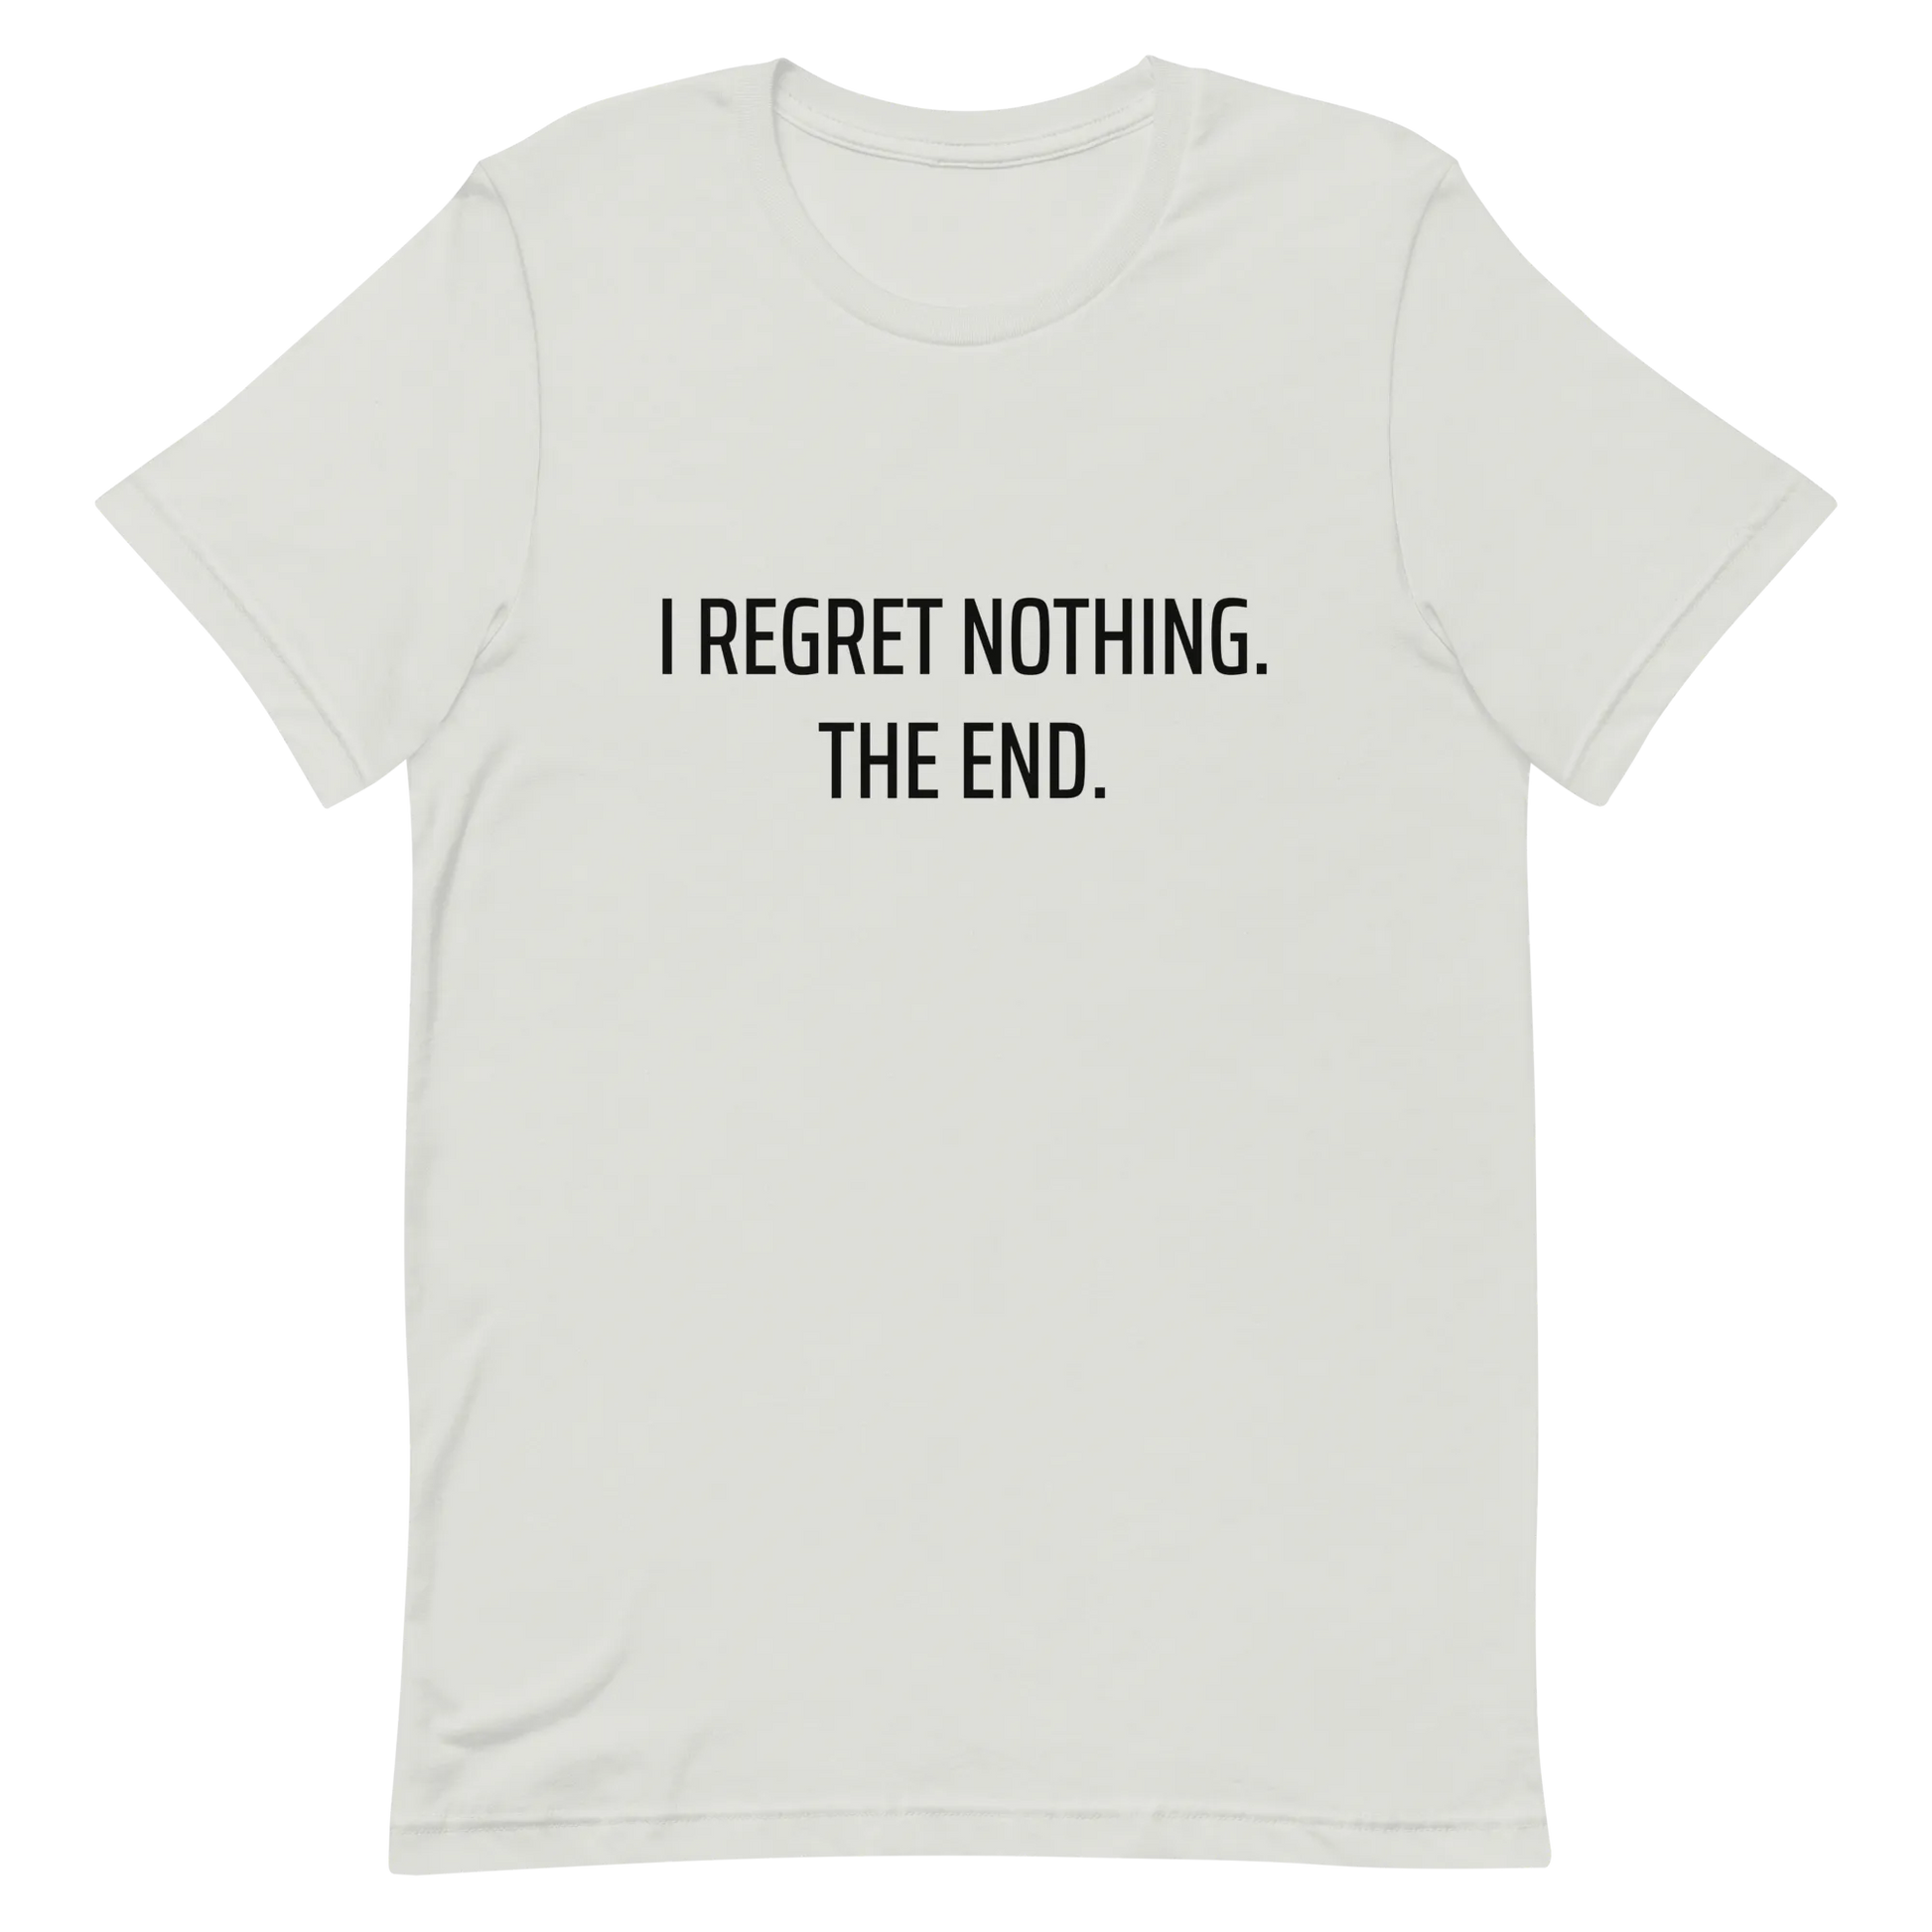 I Regret Nothing Tee in Silver flatlay